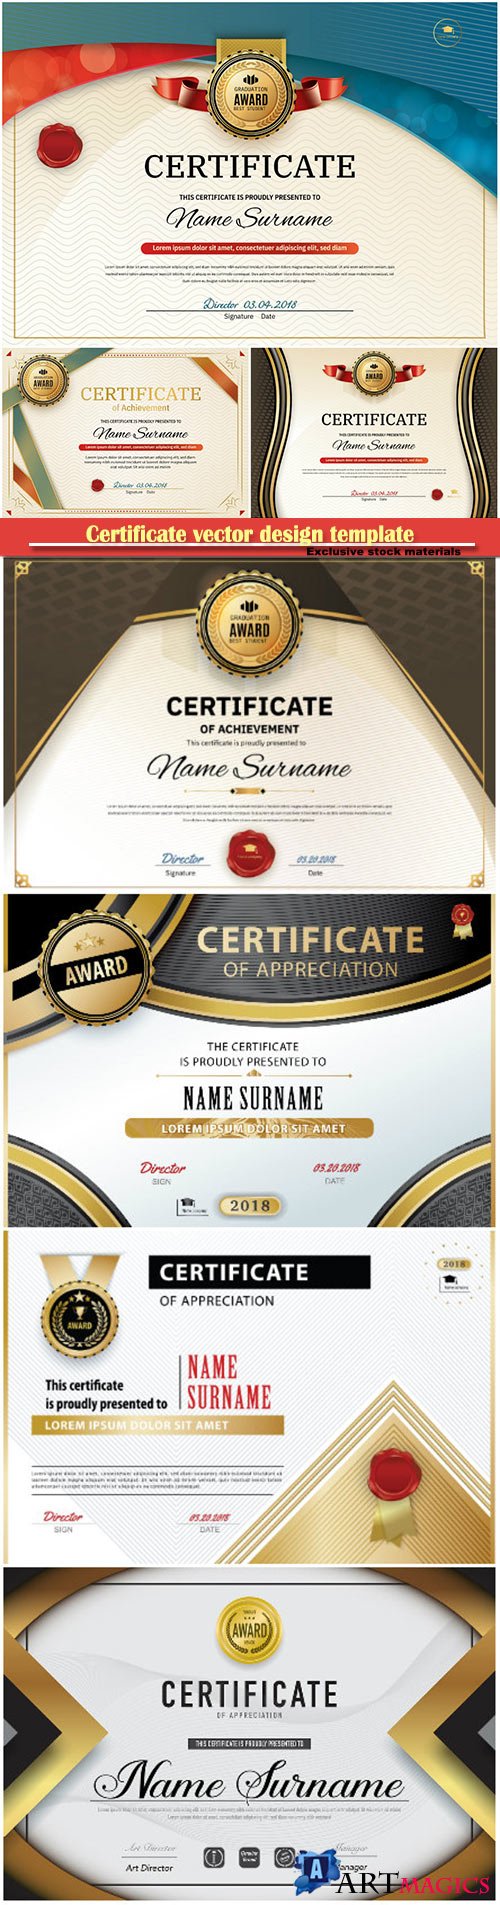 Certificate and vector diploma design template # 65